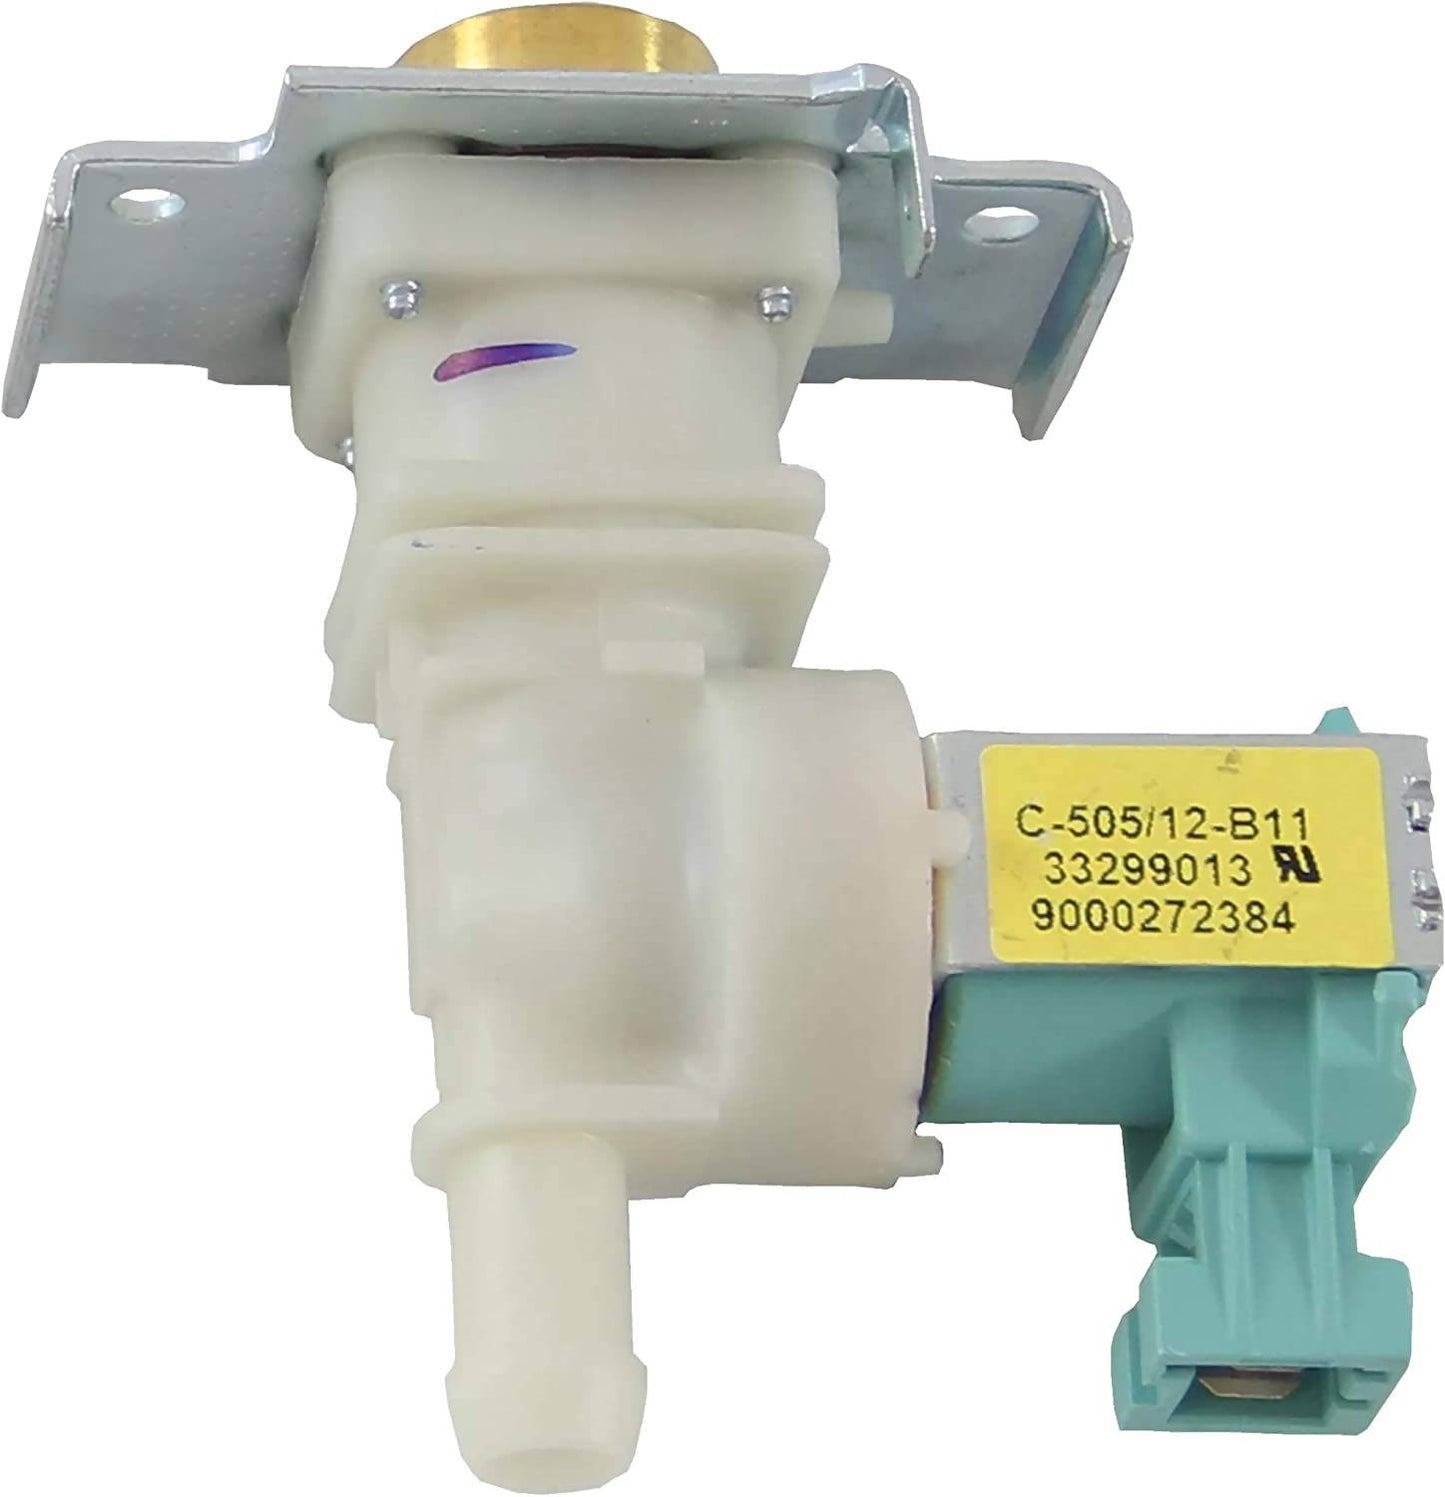 Bosch Dishwasher Water Inlet Valve - 00607335, Replaces: 1386463 607335 AH3477055 AH8726680 EA8726680 EAP3477055 PS3477055 PS8726680 PD00000067 PARTS OF CANADA LTD